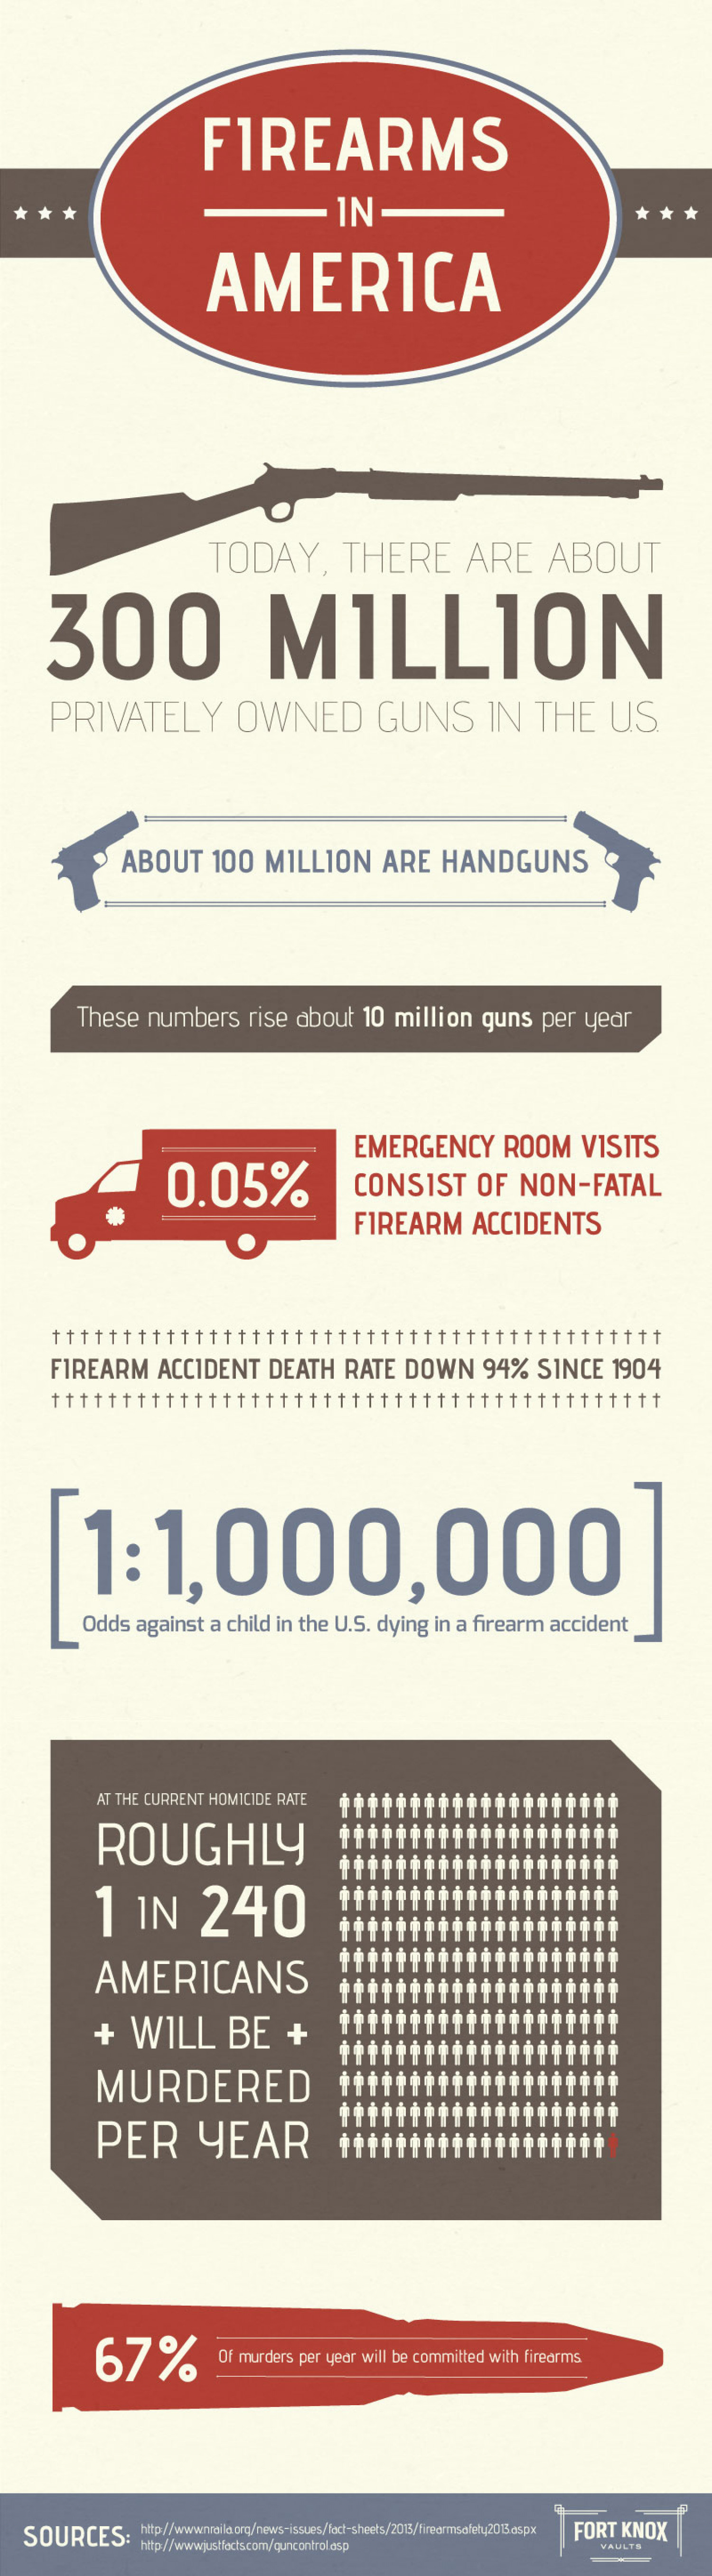 Firearms In America Infographic